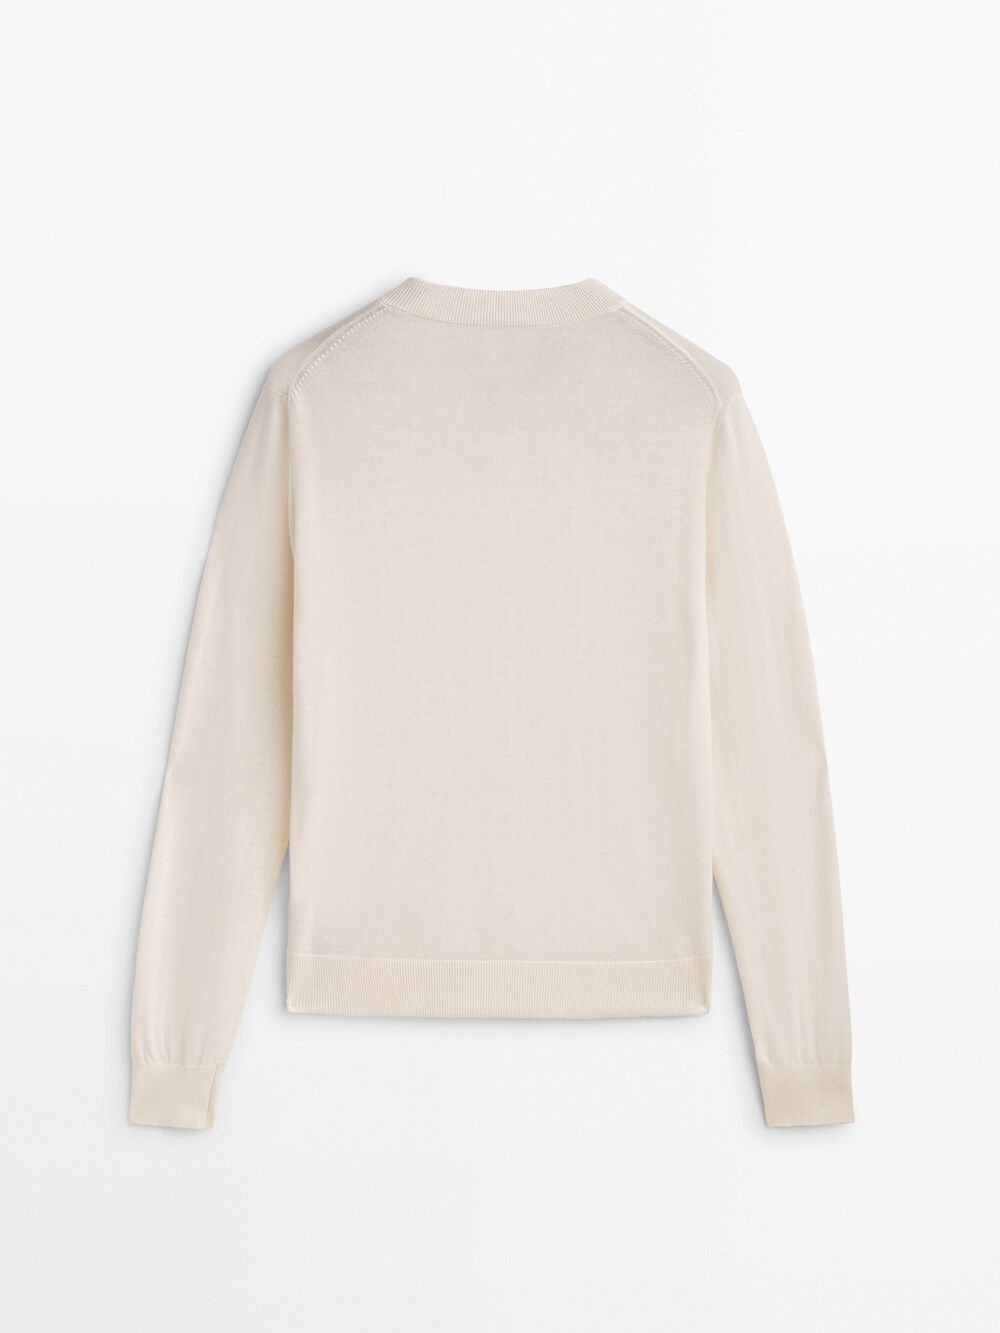 Wool and cashmere V-neck sweater | Massimo Dutti (US)